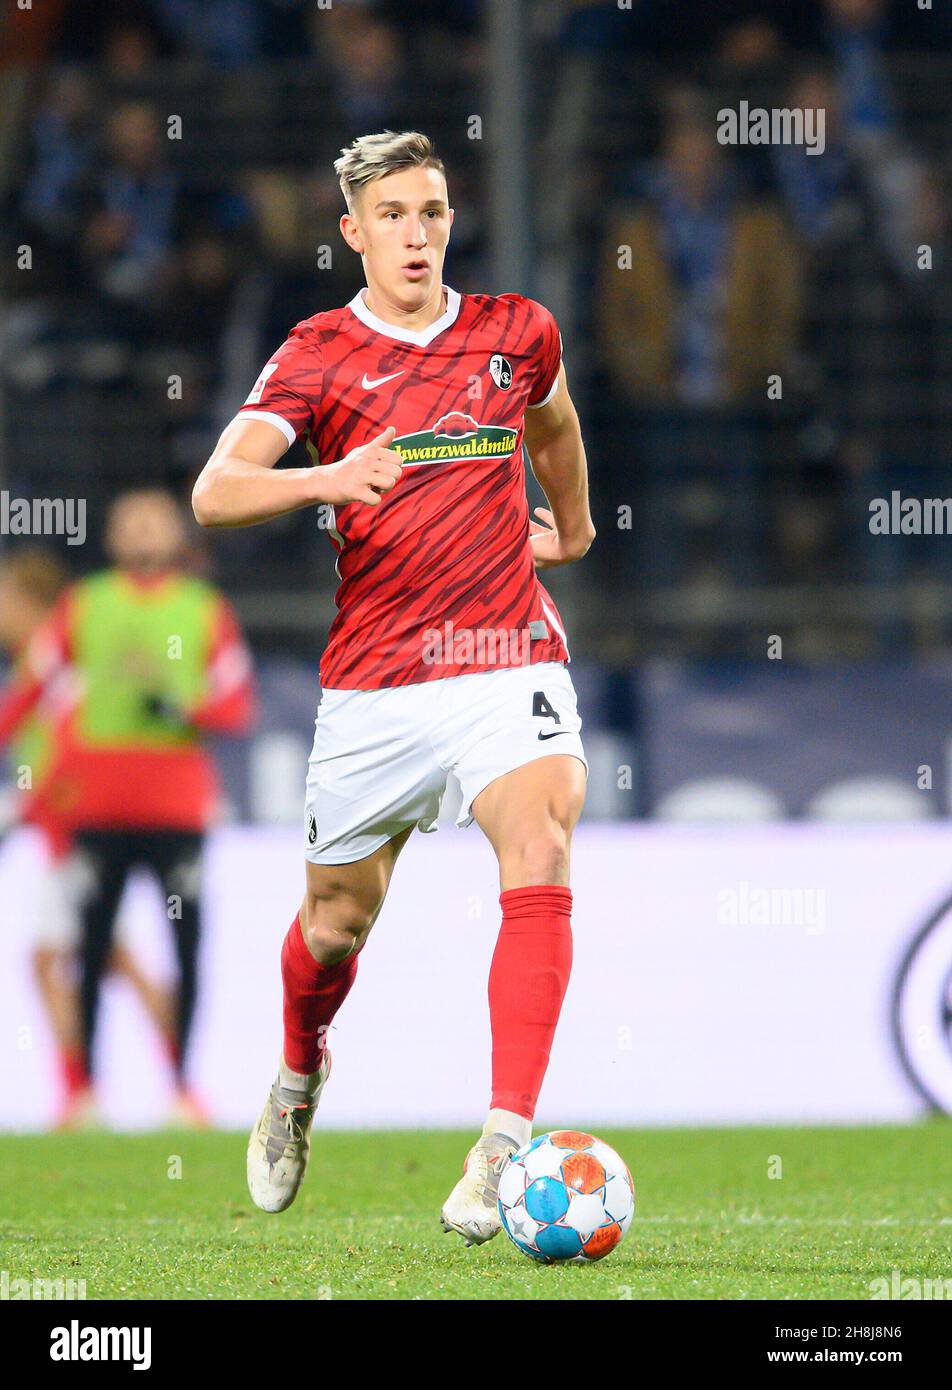 Nico SCHLOTTERBECK (FR) Action, Soccer 1st Bundesliga, 13th matchday, VfL Bochum (BO) - SC Freiburg (FR) 2: 1, on November 27th, 2021 in Bochum/Germany. #DFL regulations prohibit any use of photographs as image sequences and/or quasi-video # Â Stock Photo